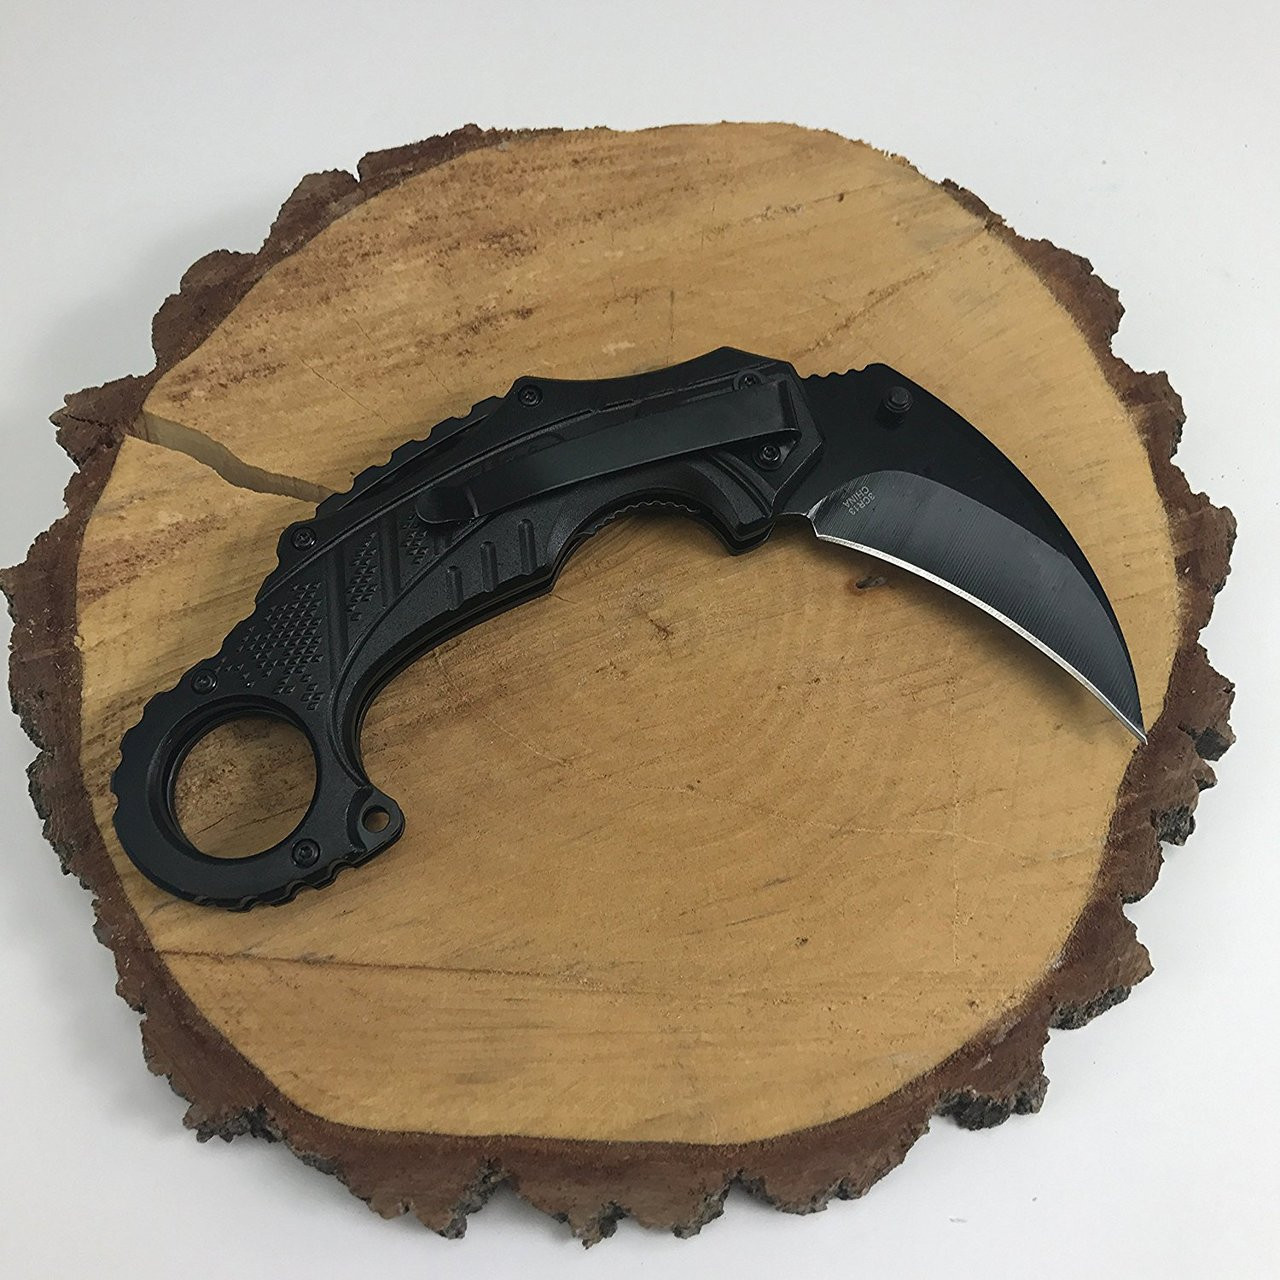 Wartech Thumb Open Spring Assisted Eagle Angle Aluminum Color Handle Karambit Pocket Knife - PWT241BK